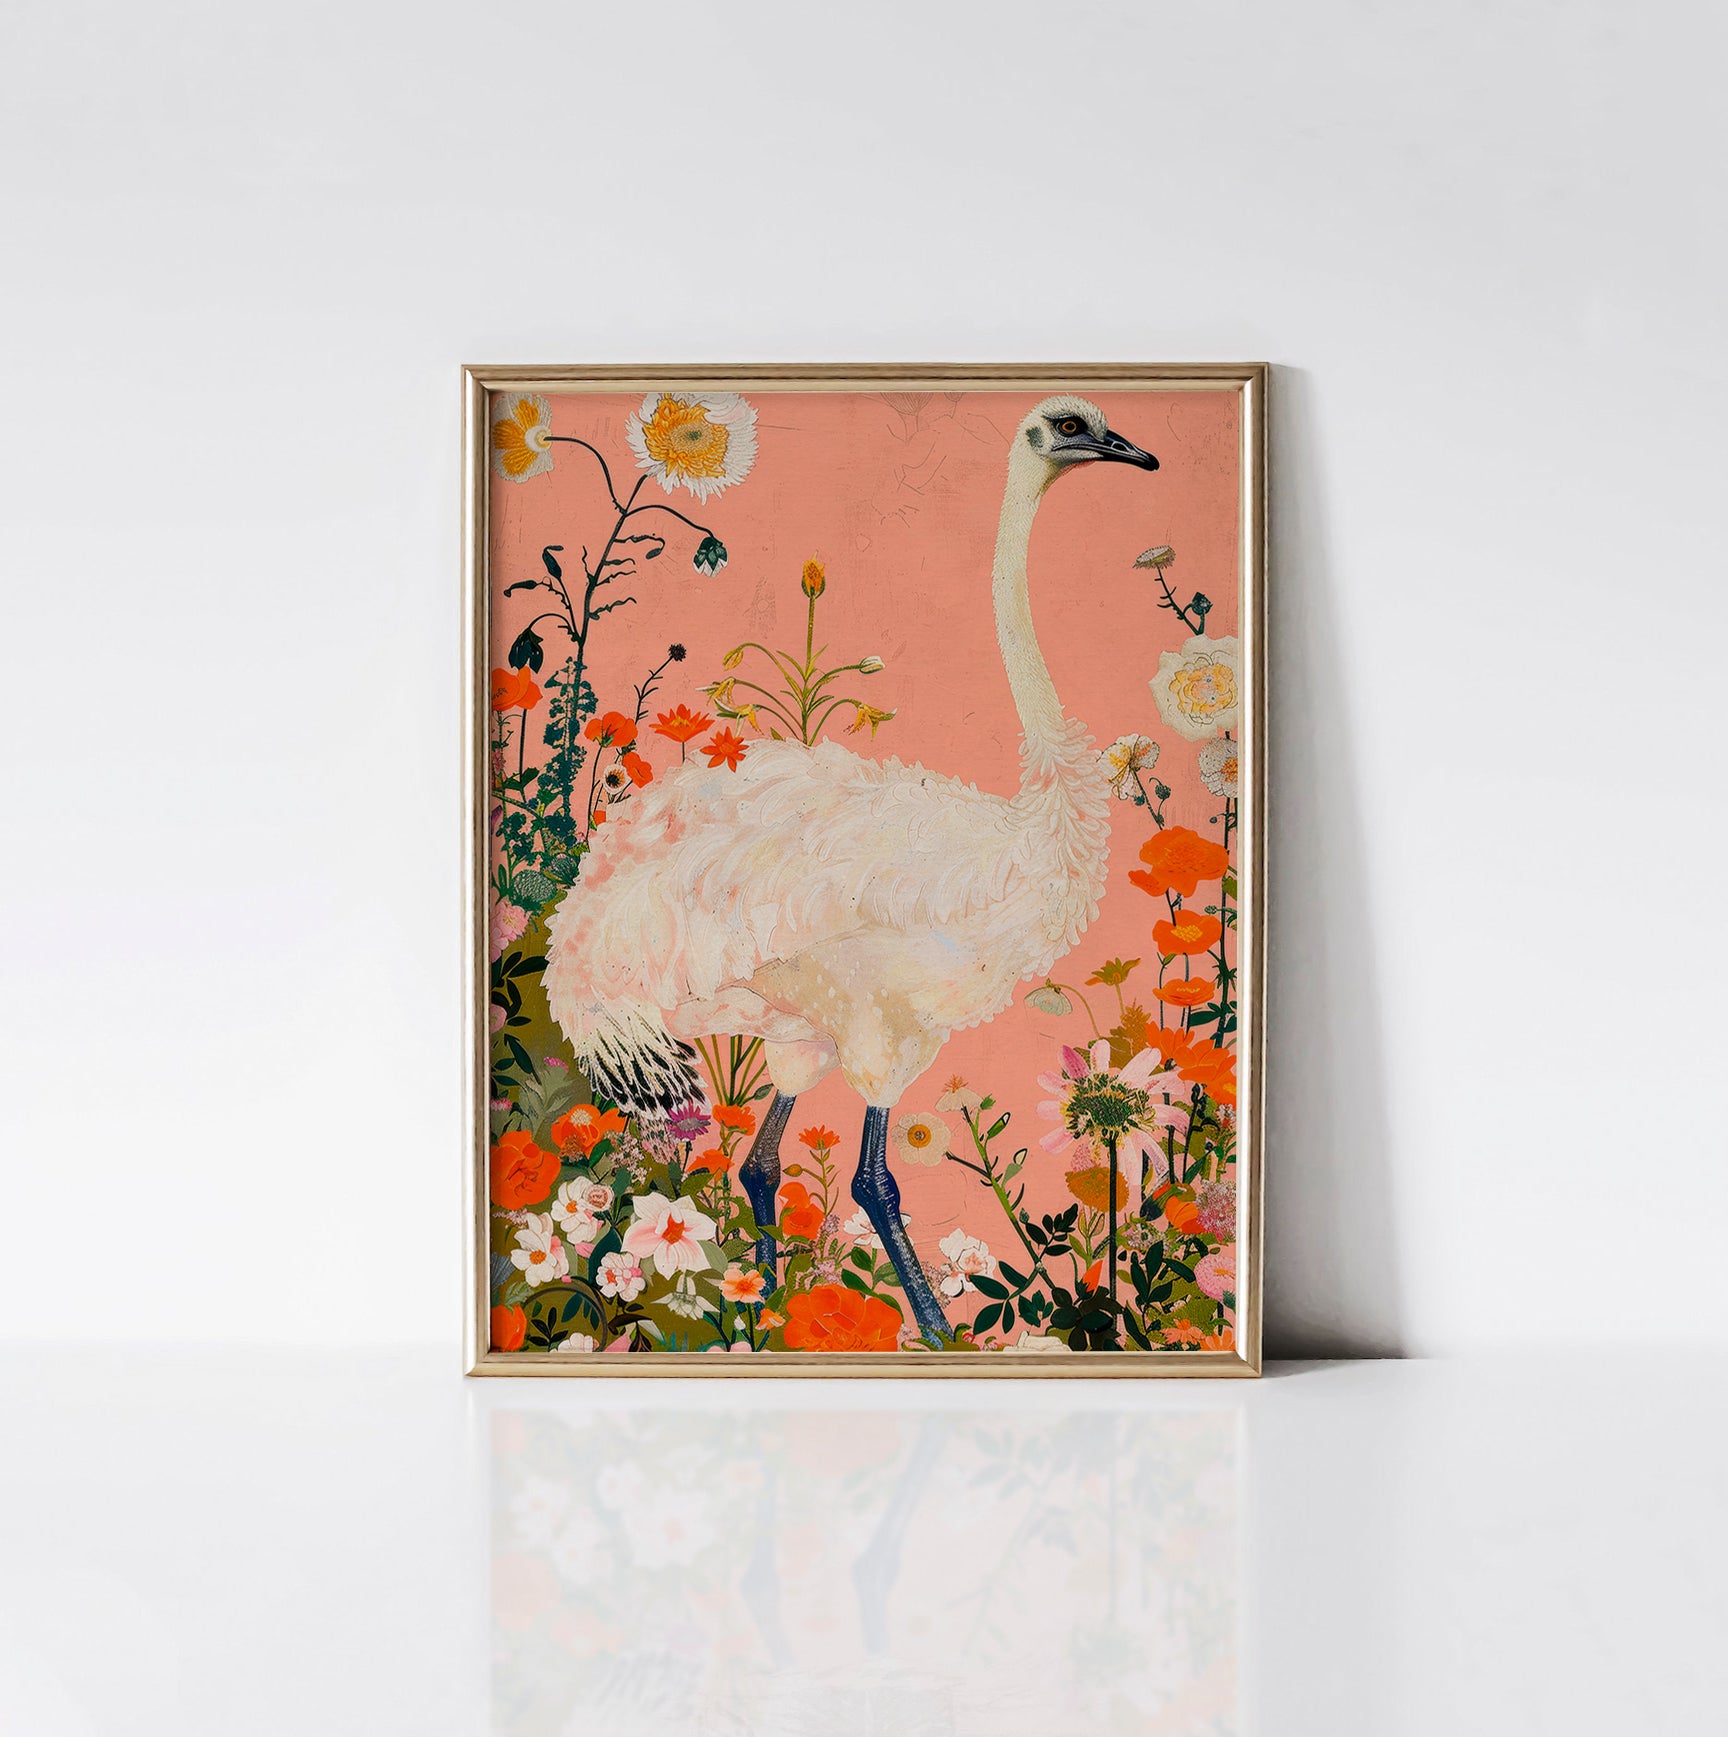 Ethereal Ostrich Garden Art Print framed in an elegant gold frame, showcasing an ostrich with white feathers among colorful flowers on a peach background.